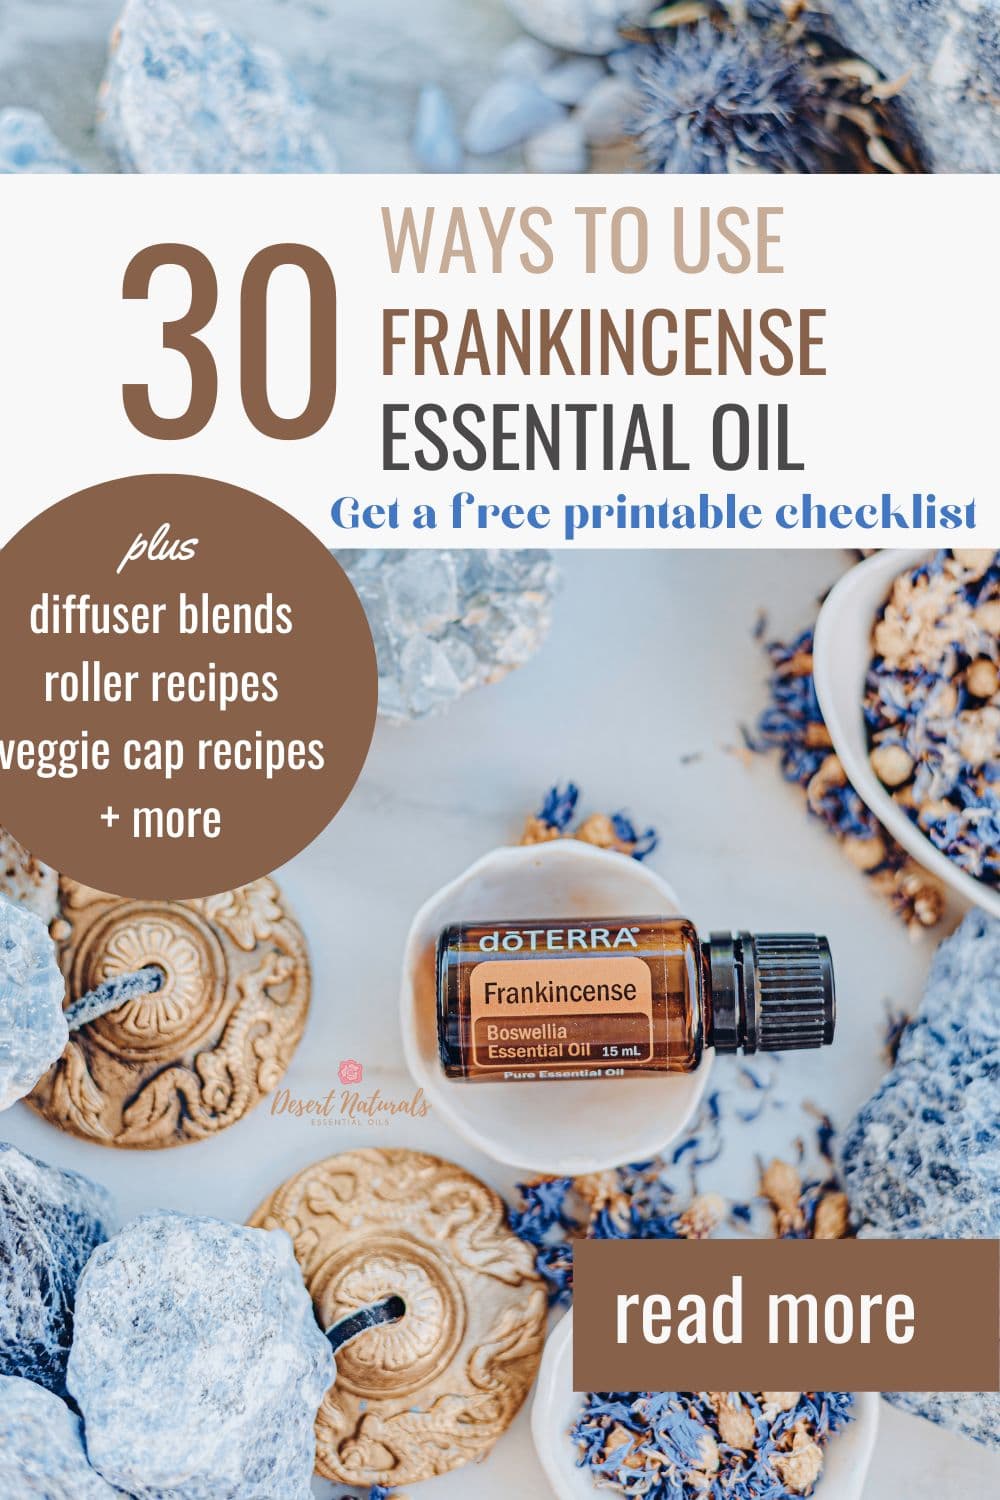 image of doTERRA Frankincense essential oil plus text 30 ways to use frankincense essential oil